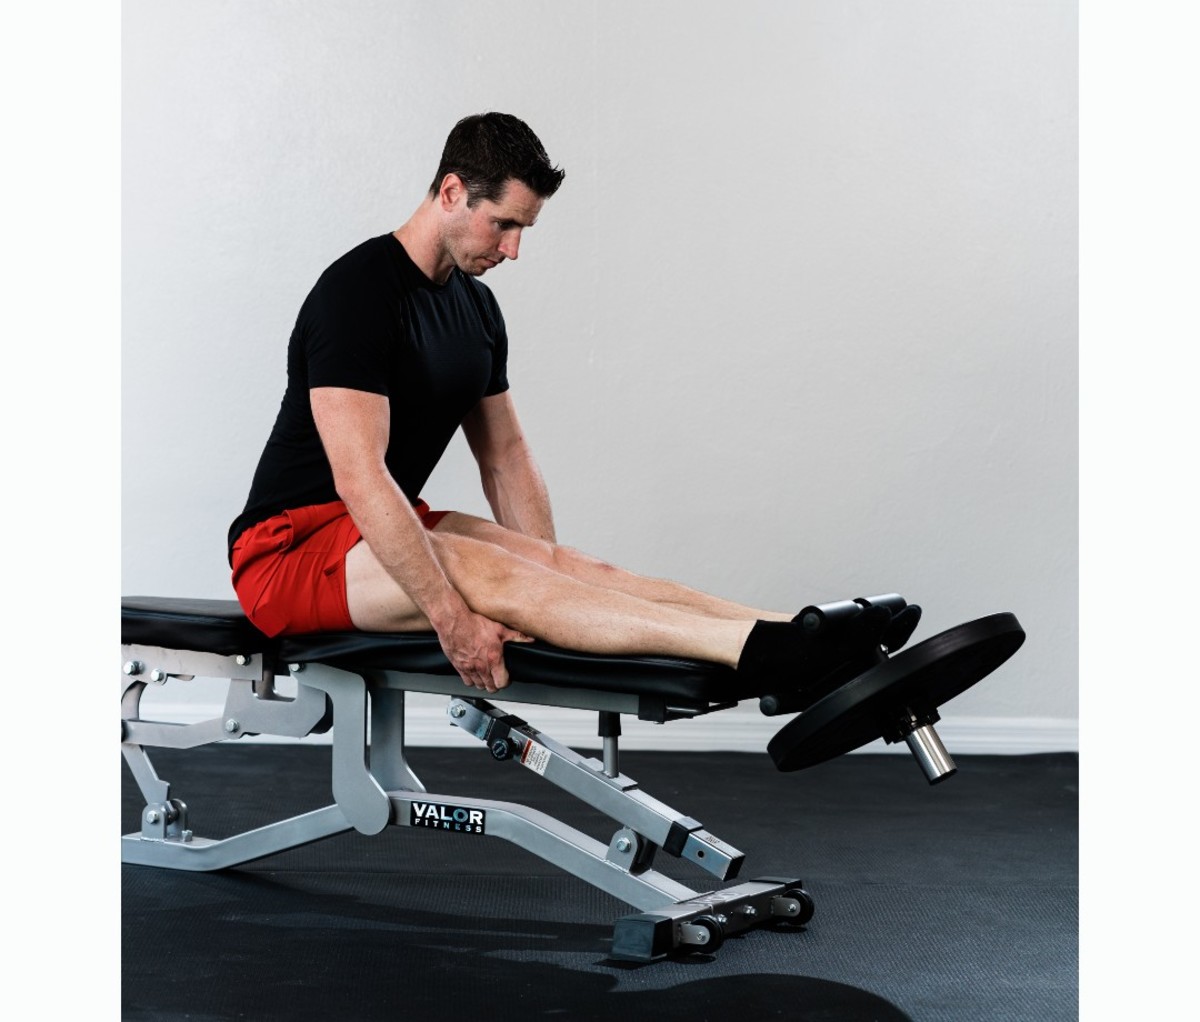 Caucasian man in black T-shirt and red shorts doing tibialis raise on bemch